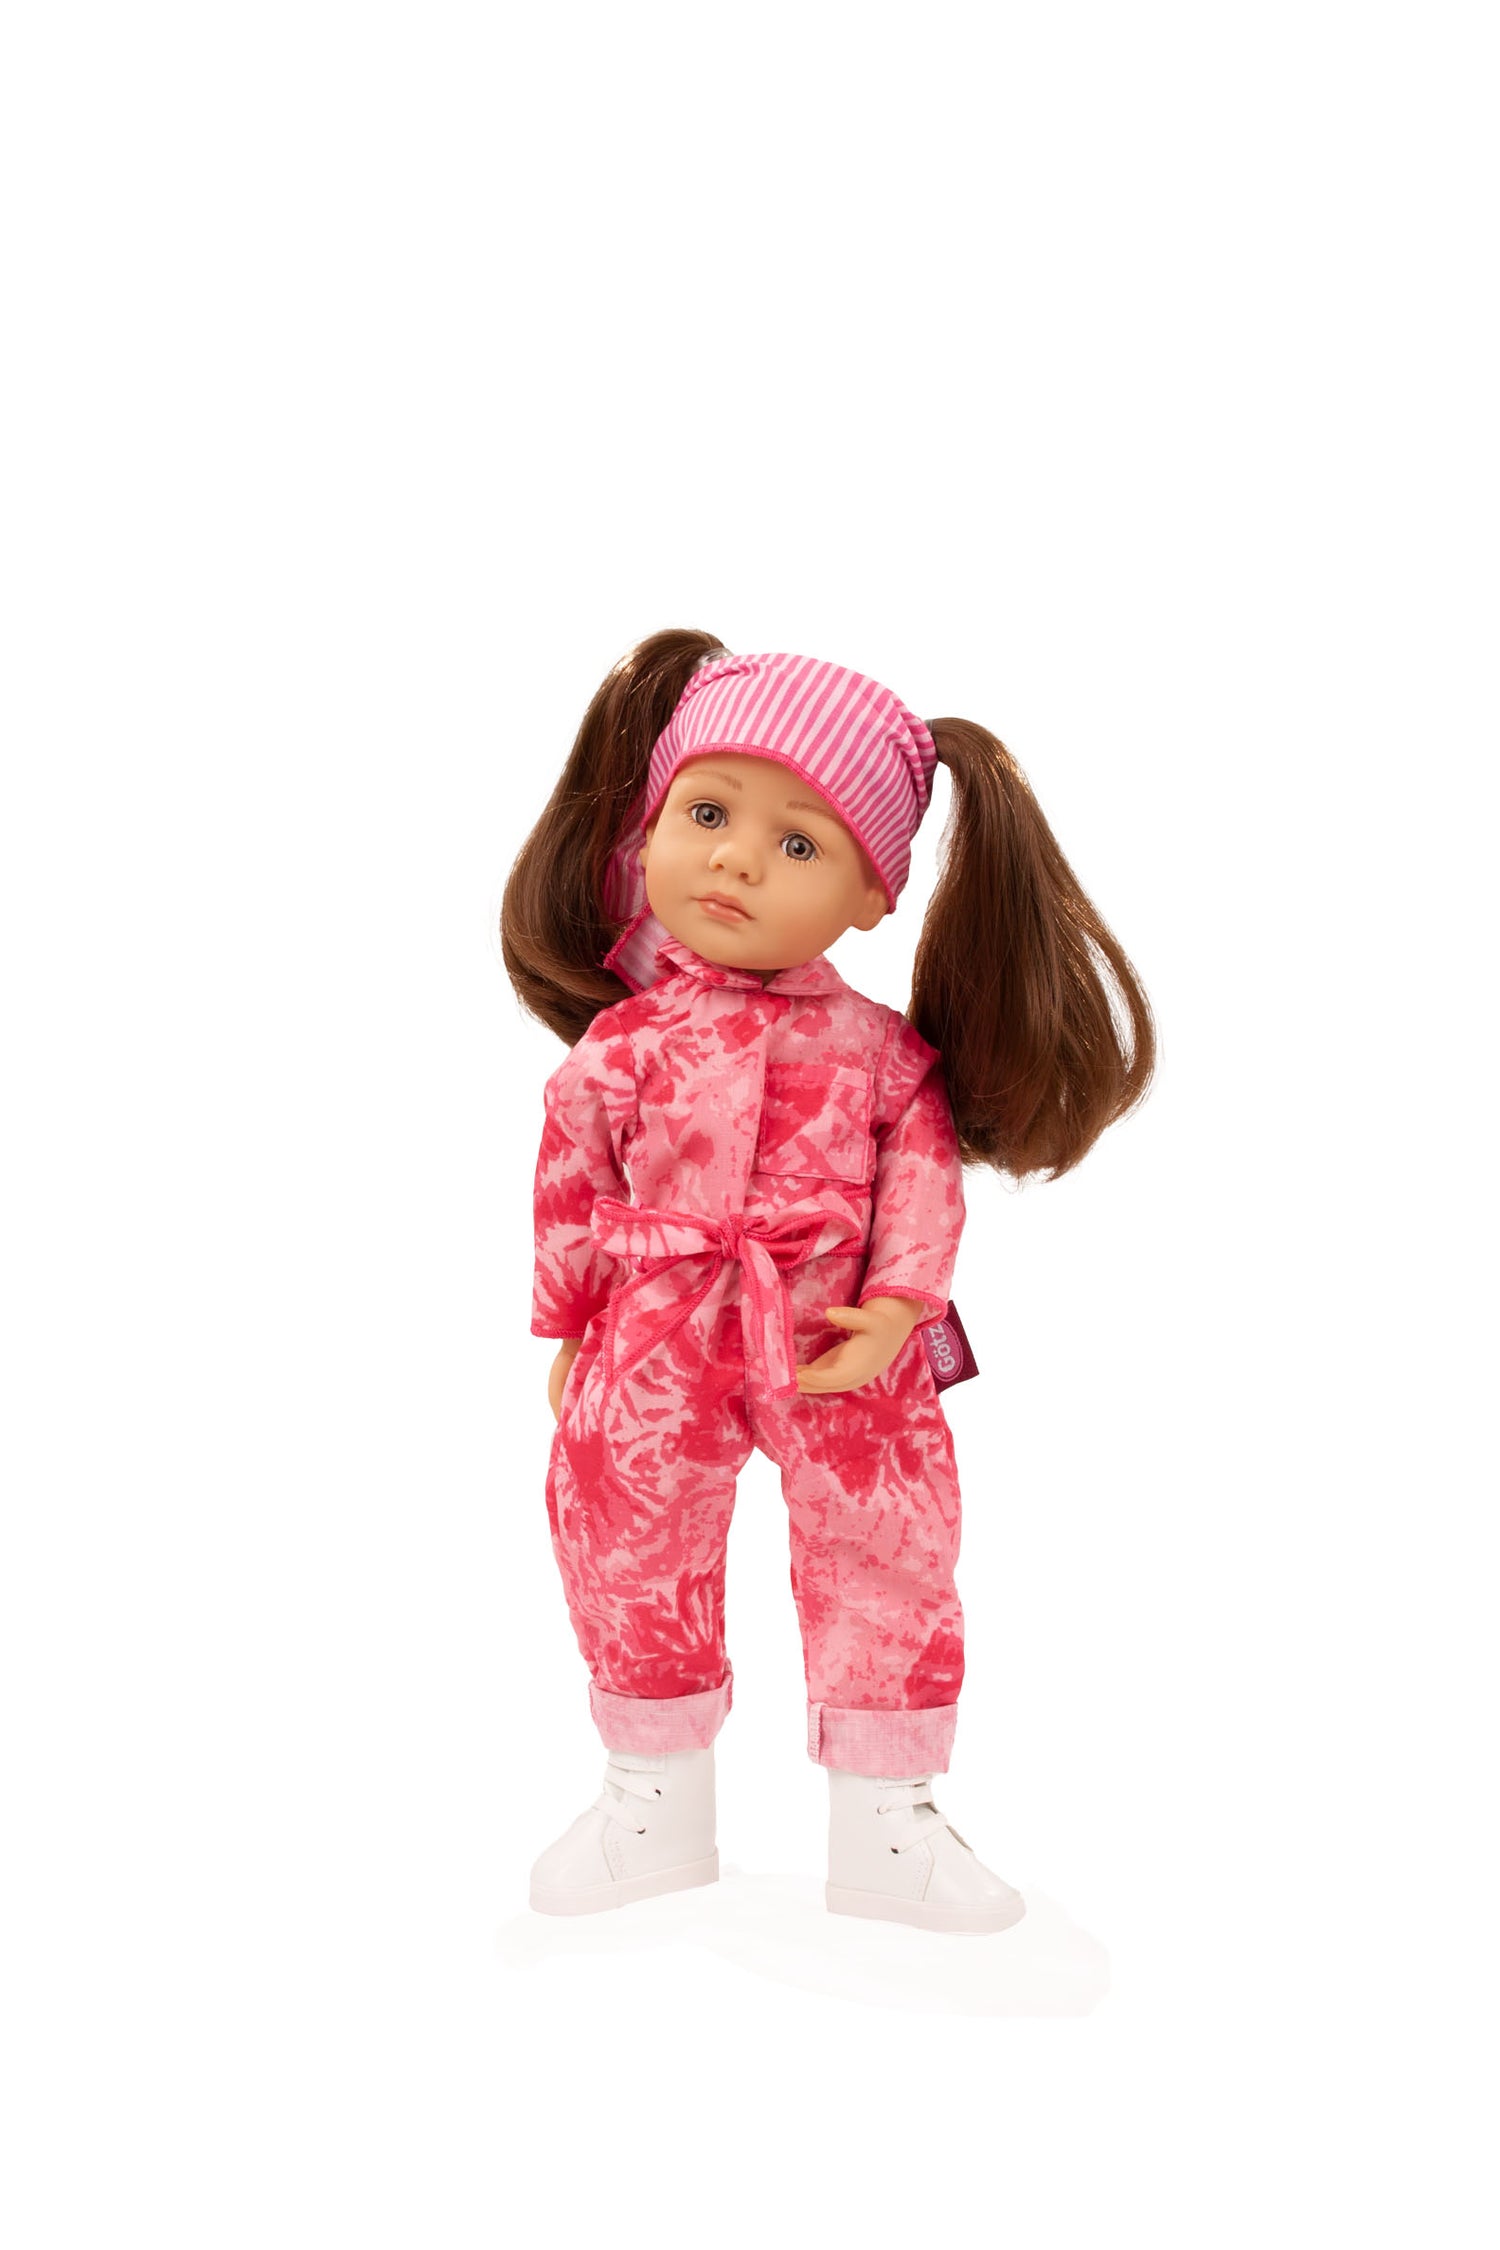 Grete in pink - Dolls and Accessories